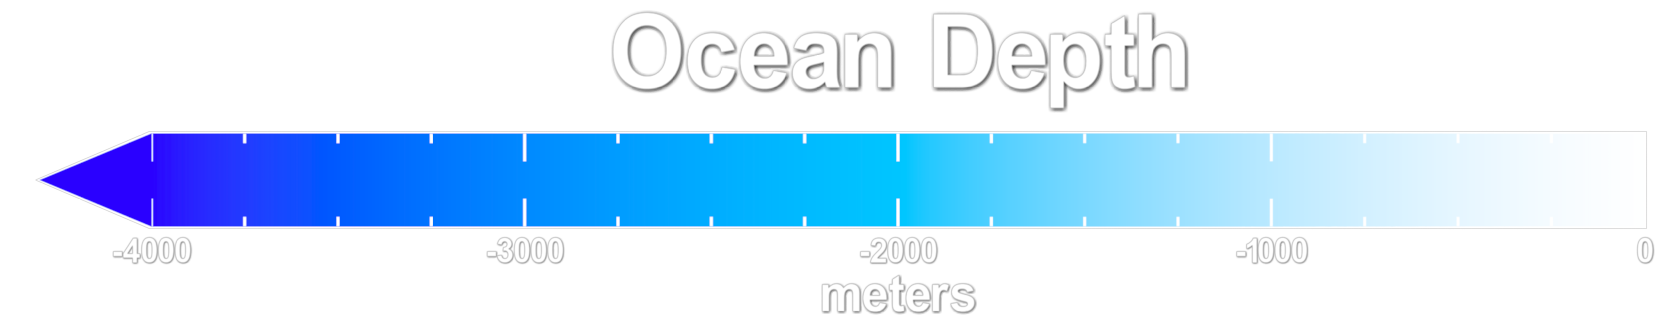 Ocean depth colorbar from white at the surface to cyan at 2000 meters deep to blue at 4000 meters deep